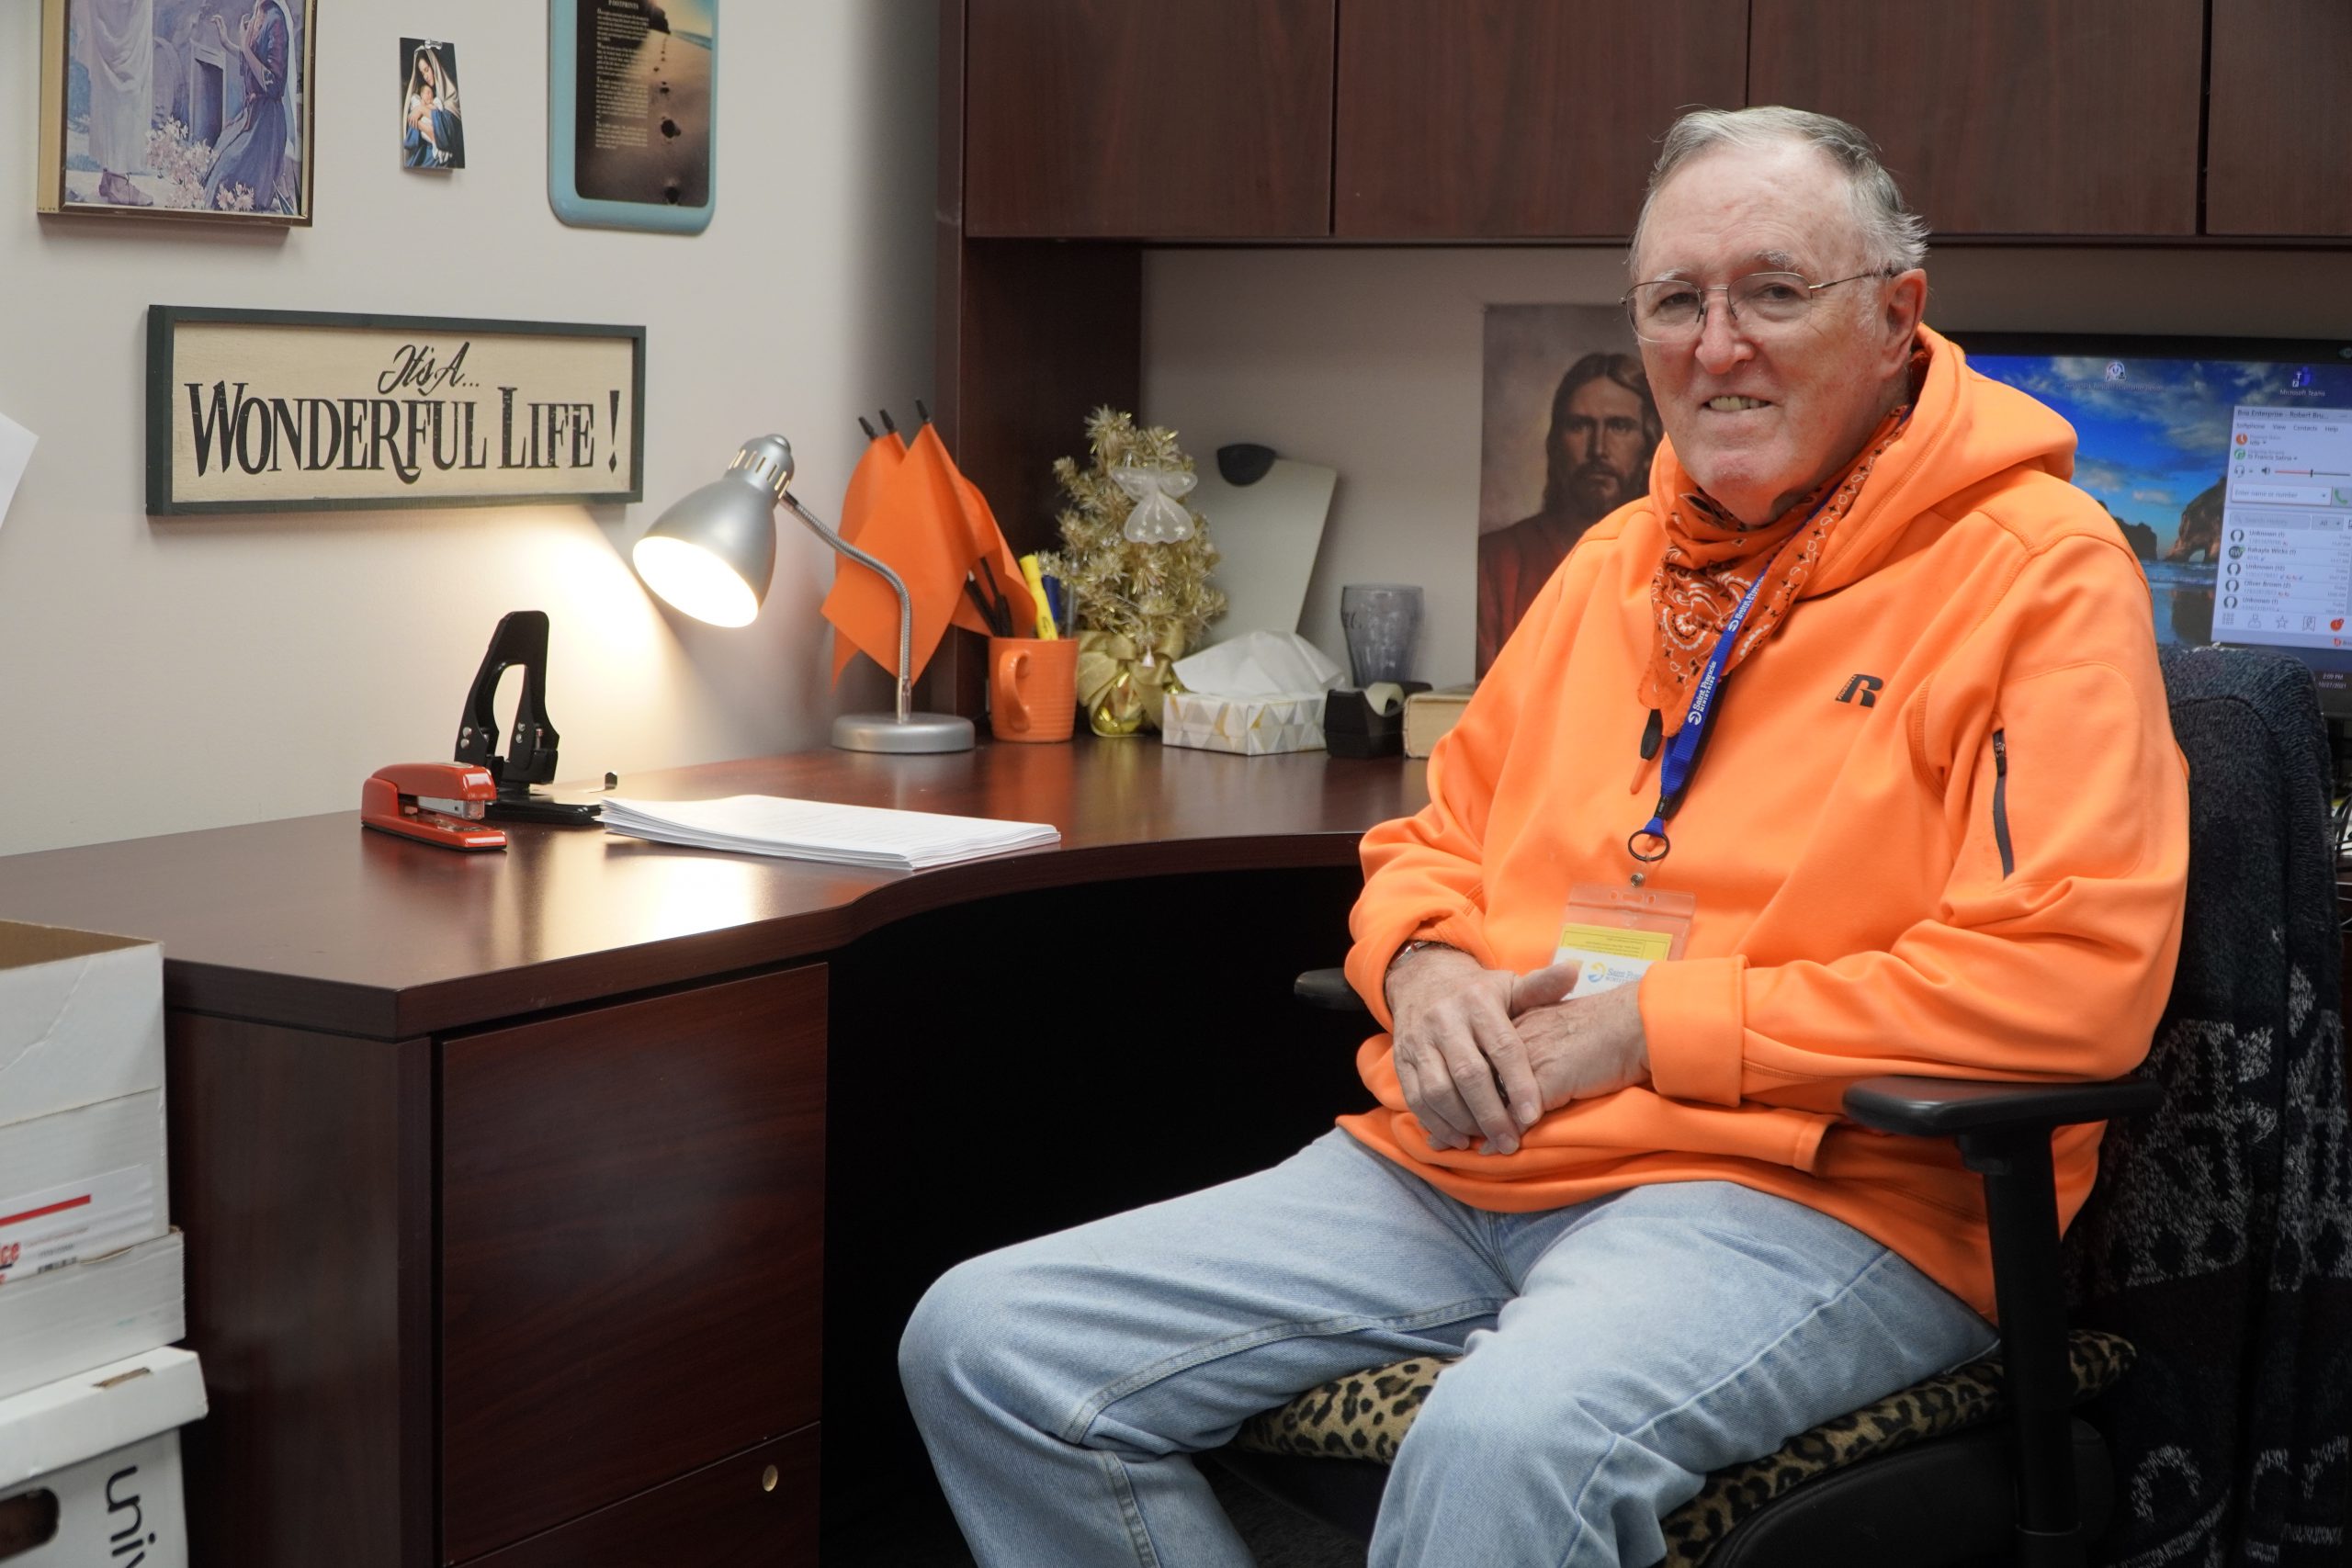 An elderly man wearing an orange hoodie sits in an office chair beside a polished wooden desk. The desk has a lamp, office supplies, and a "It's a Wonderful Life!" sign on the wall. A computer monitor and personal items are visible in the background.